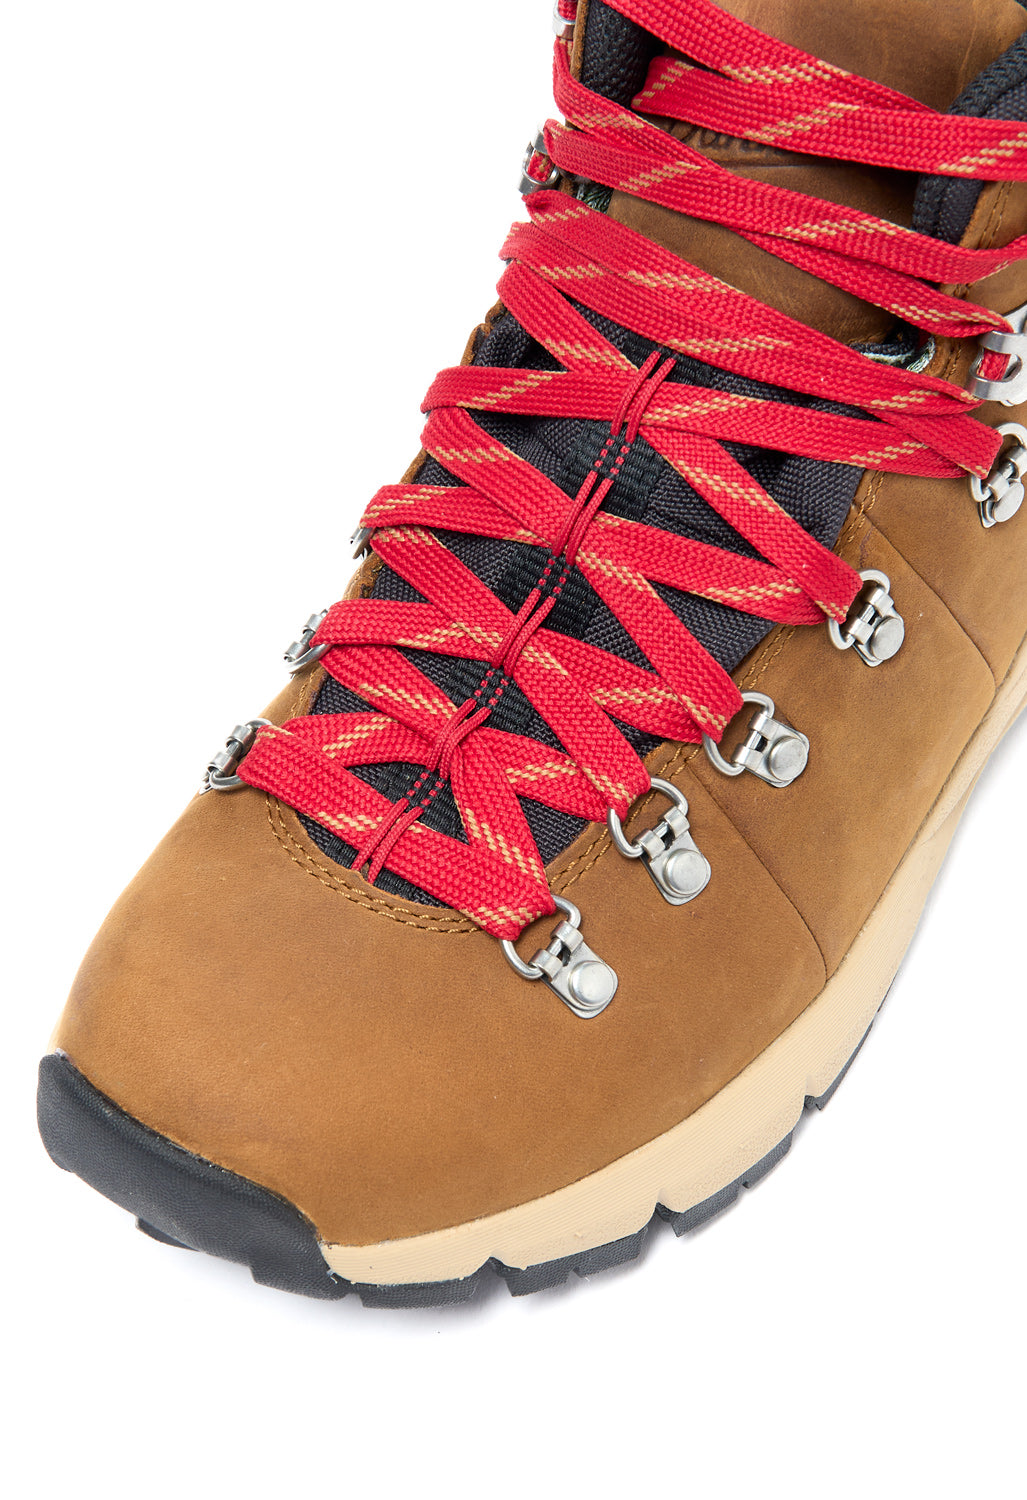 Danner Women's Mountain 600 Leaf 4.5" GTX Boots - Grizzly Brown / Rhodo Red